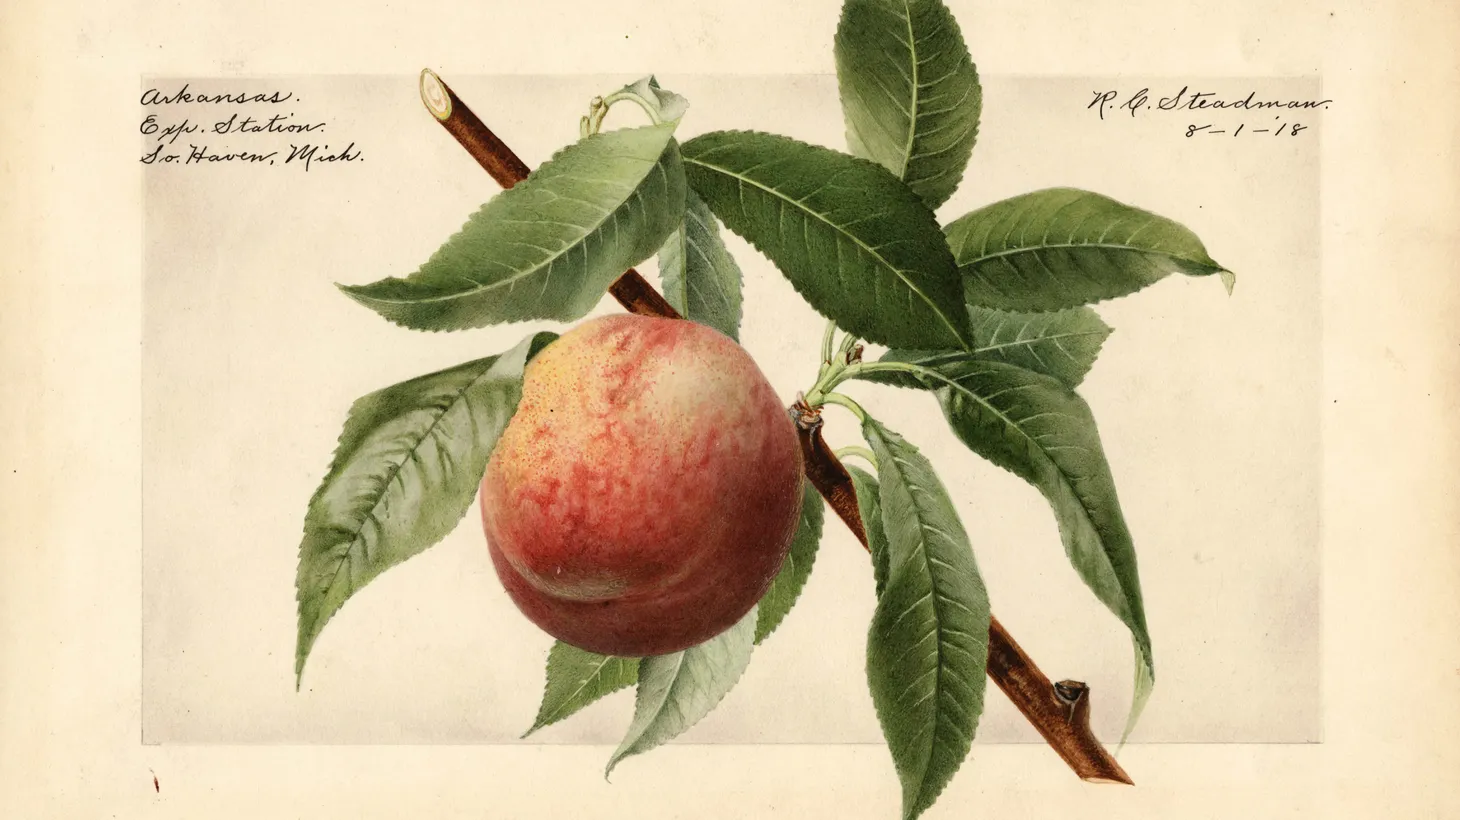 The specimen used to depict an Arkansas peach was taken from the South Haven Agricultural Experiment Station and painted in 1918.